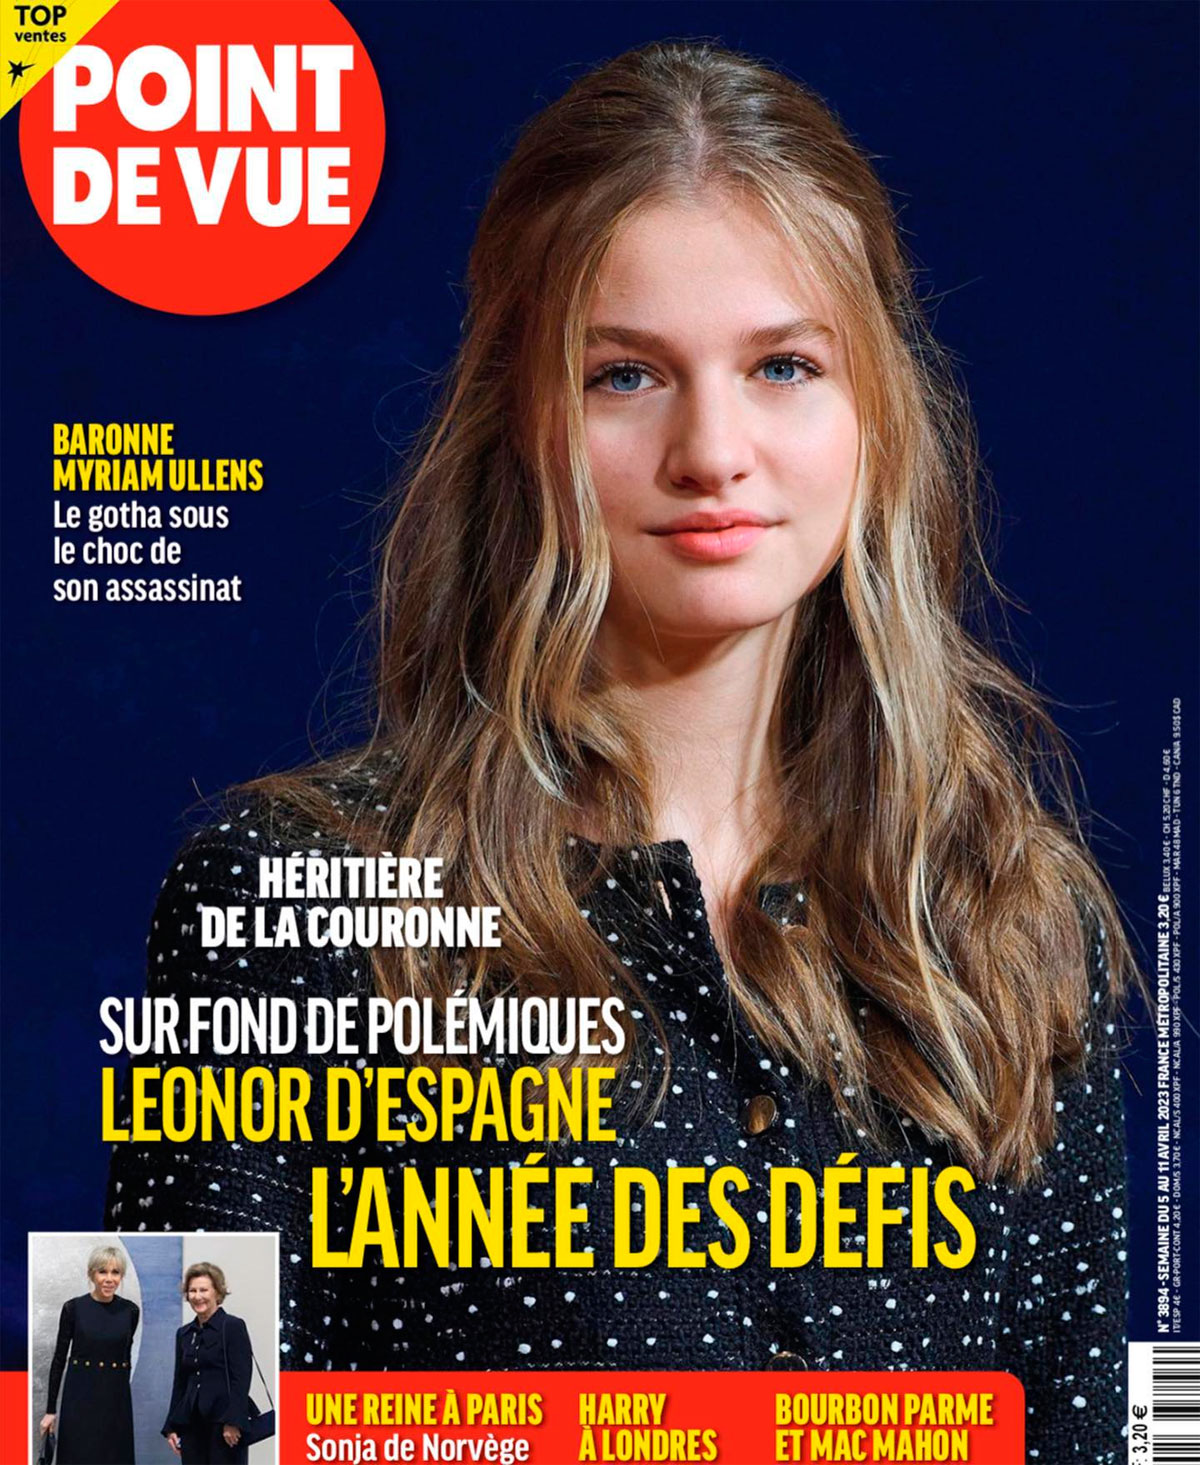 Princess Leonor on the cover of Point de Vue